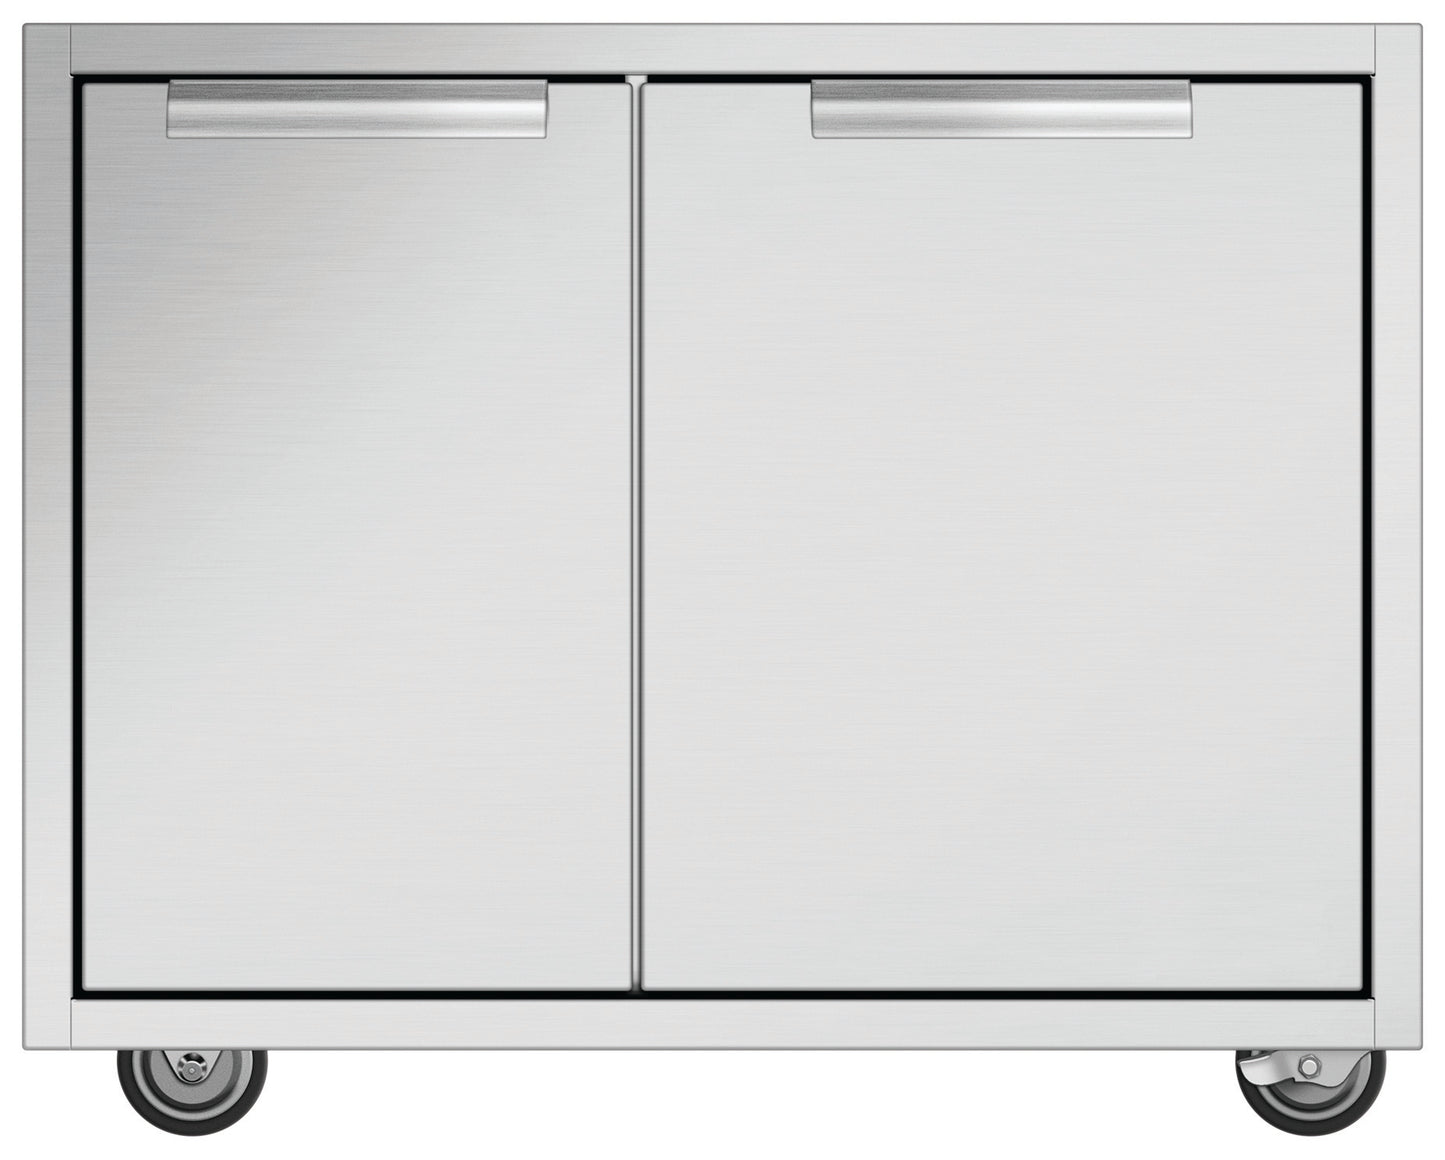 DCS Series 7 and 9 Cad Grill Cart 30"